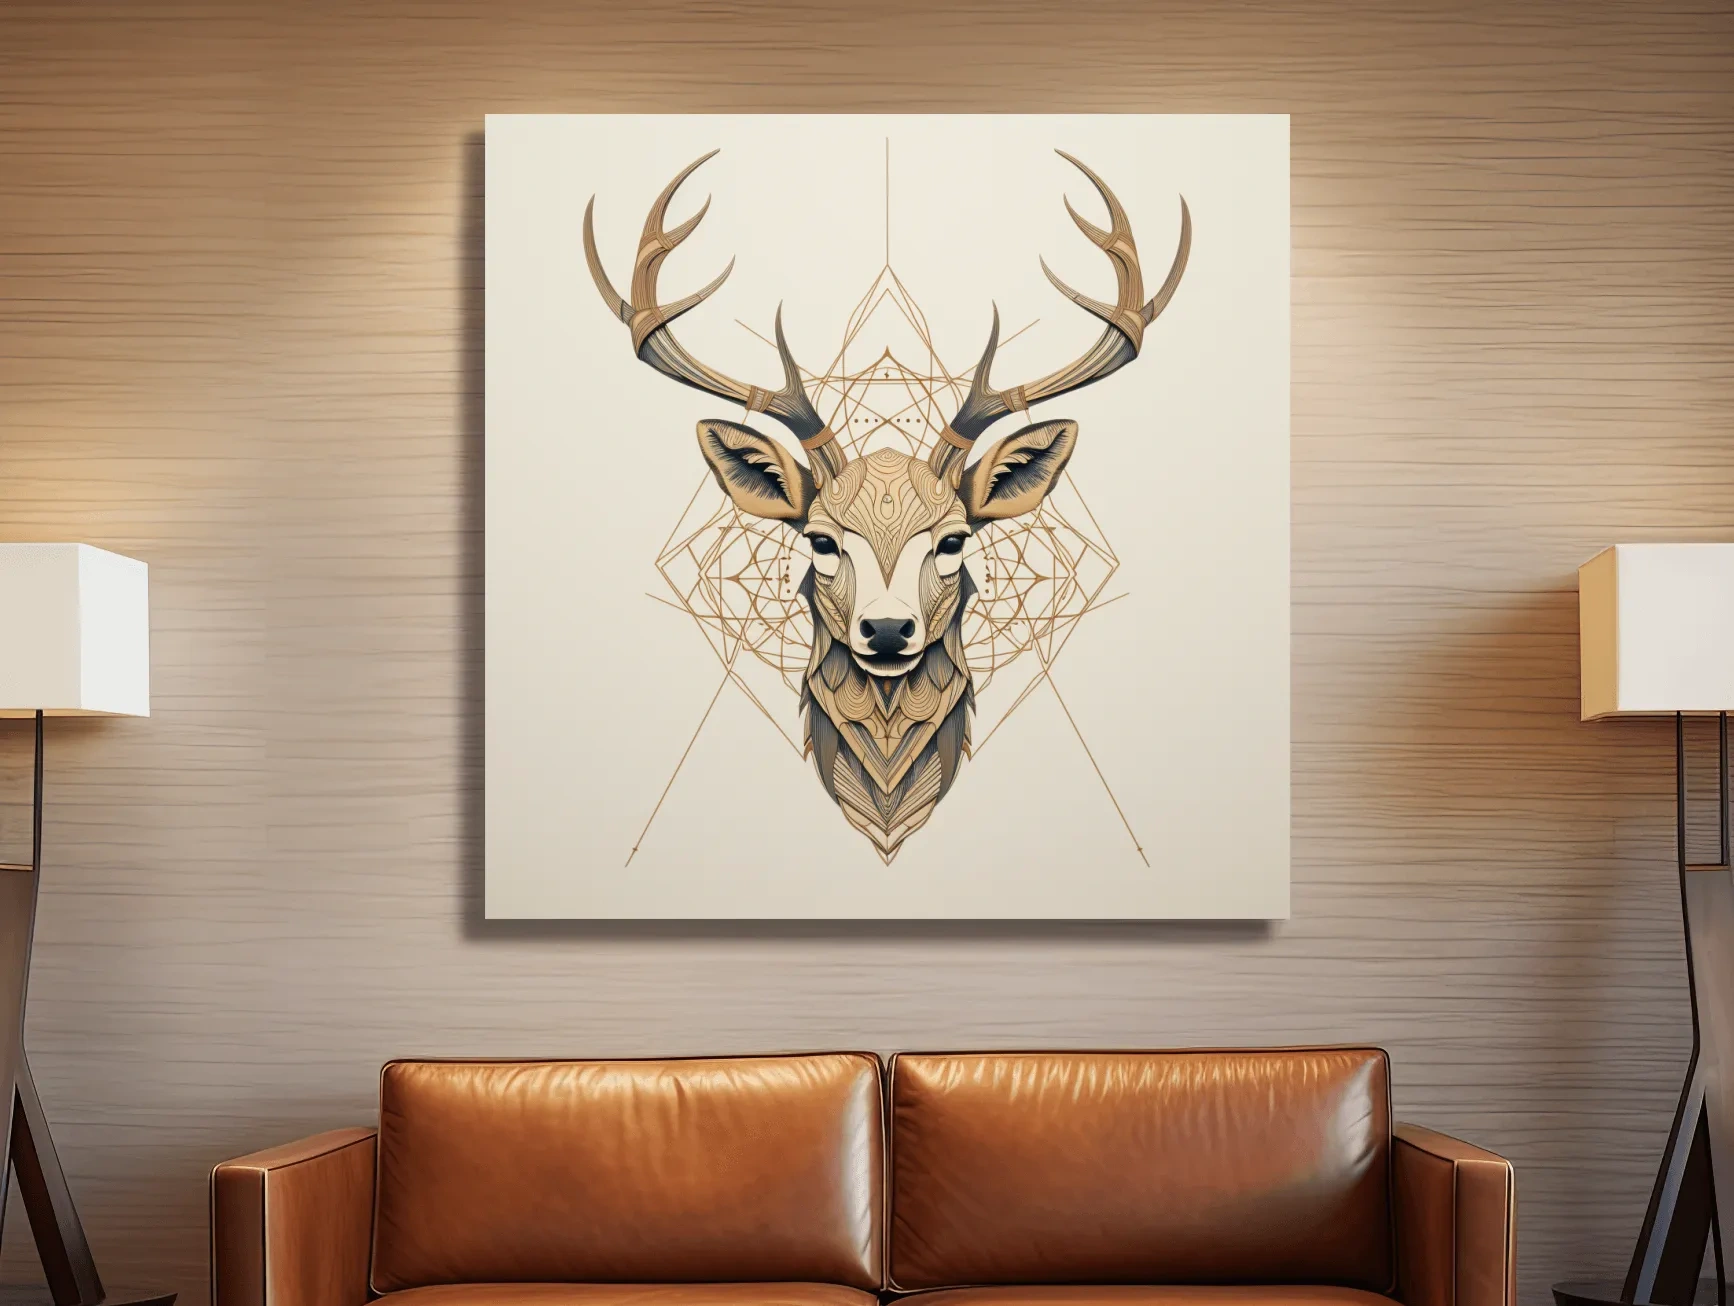 Geometric tattoo style illustration of a deer head - Gallery wrapped canvas  artwork